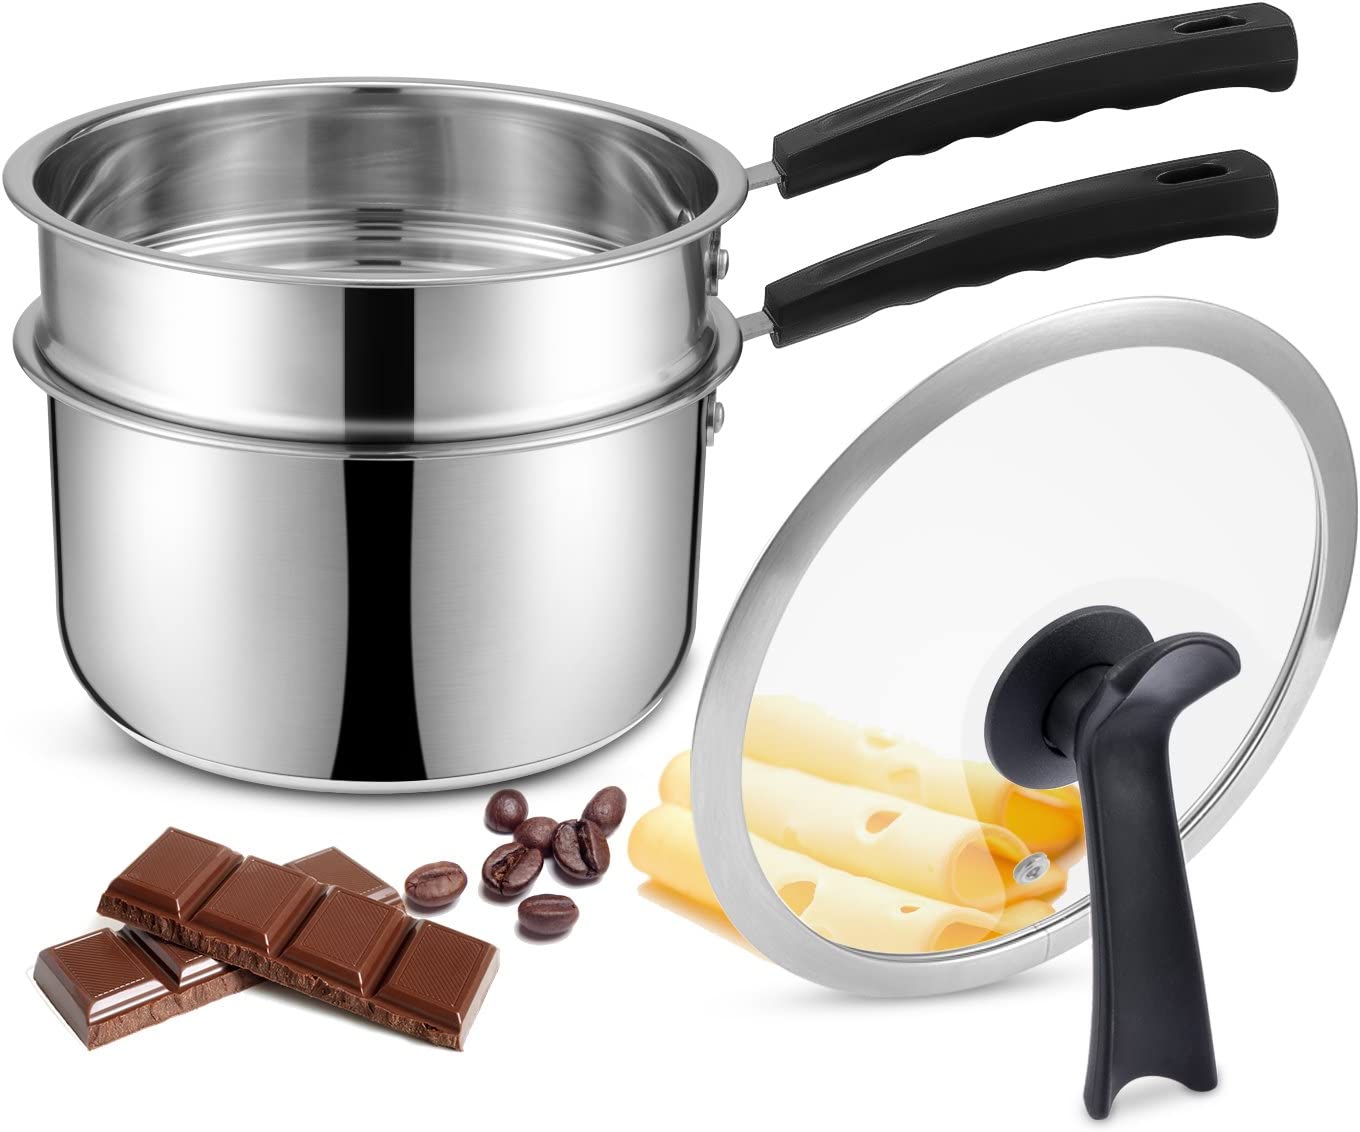 JKsmart Insulated Easy Clean Double Boiler For Chocolate, 2.5-Quart